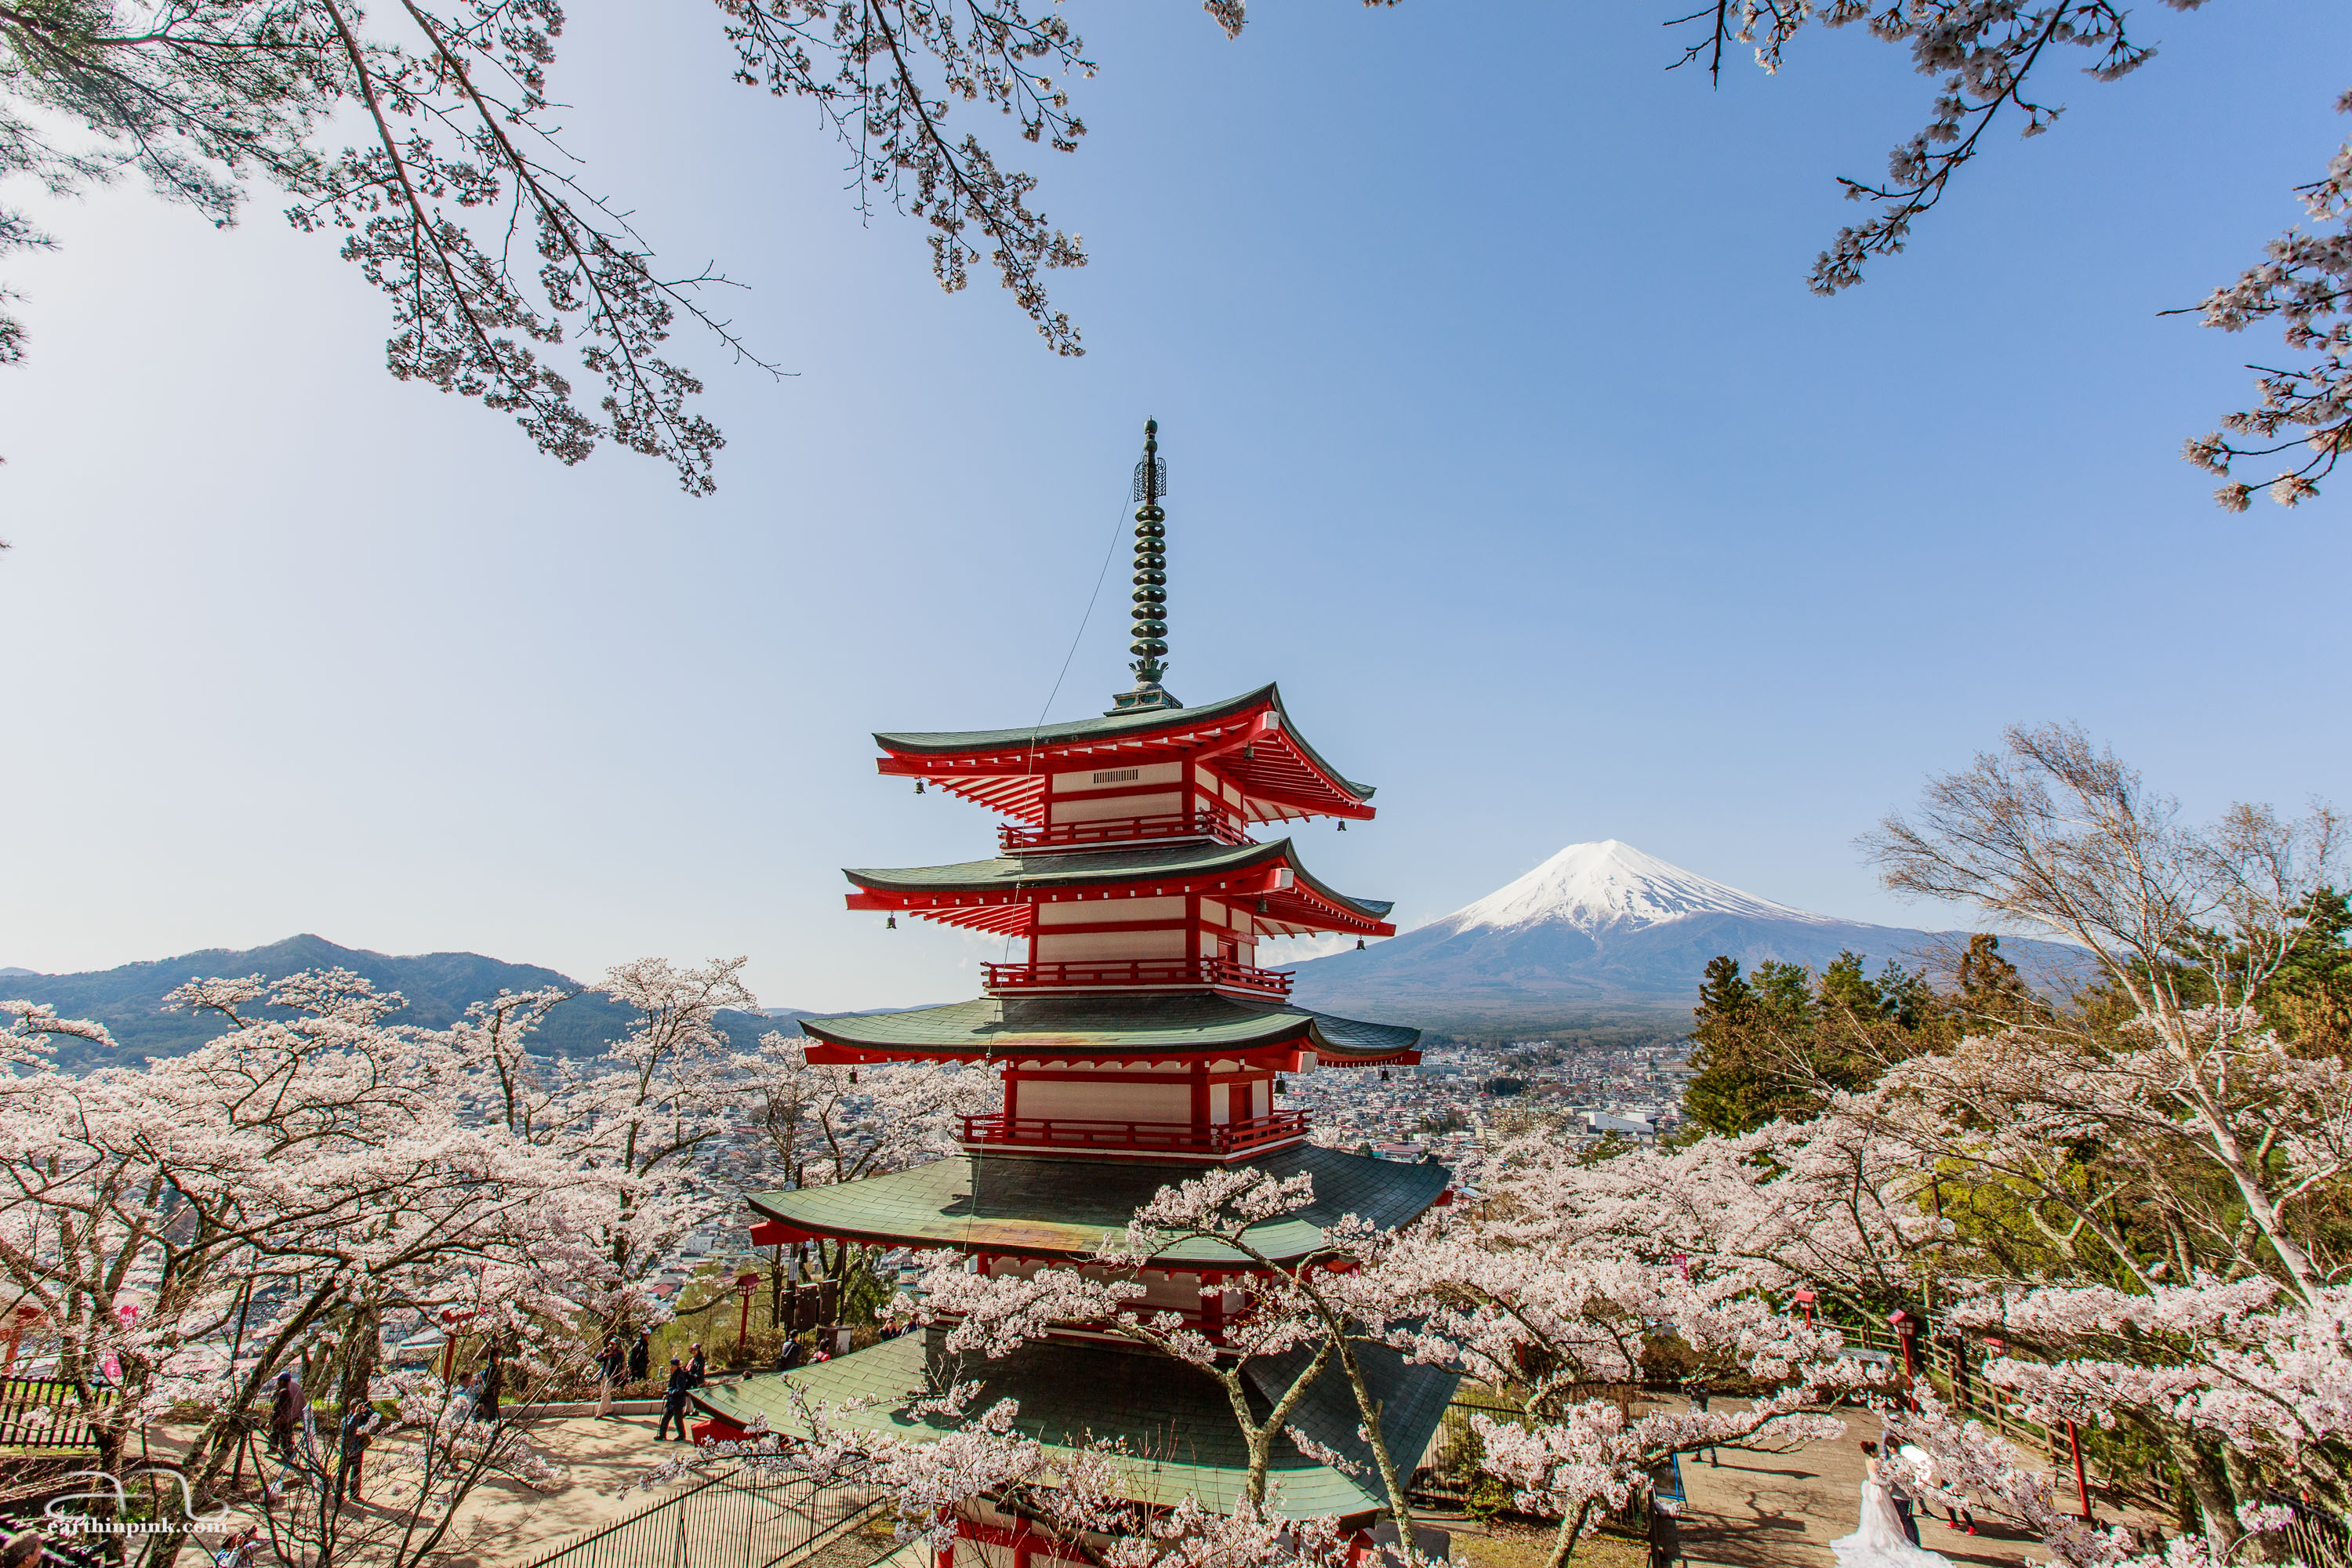 Chureito pagoda and cherry blossoms against the backdrop of majestic Mount Fuji